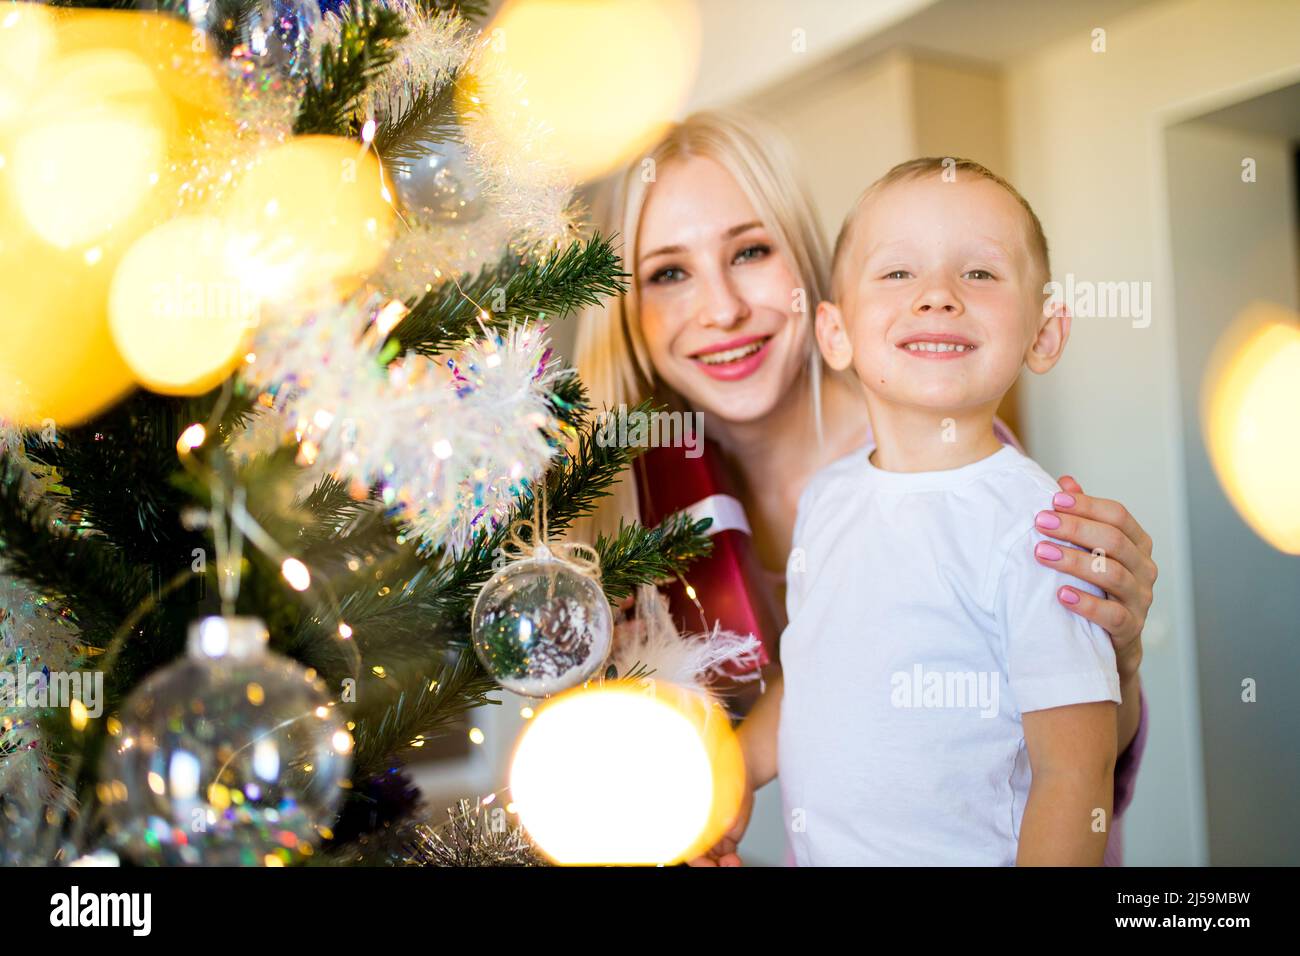 young mother and little son, lifestyle holiday people concept self-isolation in quarantine due to coronavirus Stock Photo